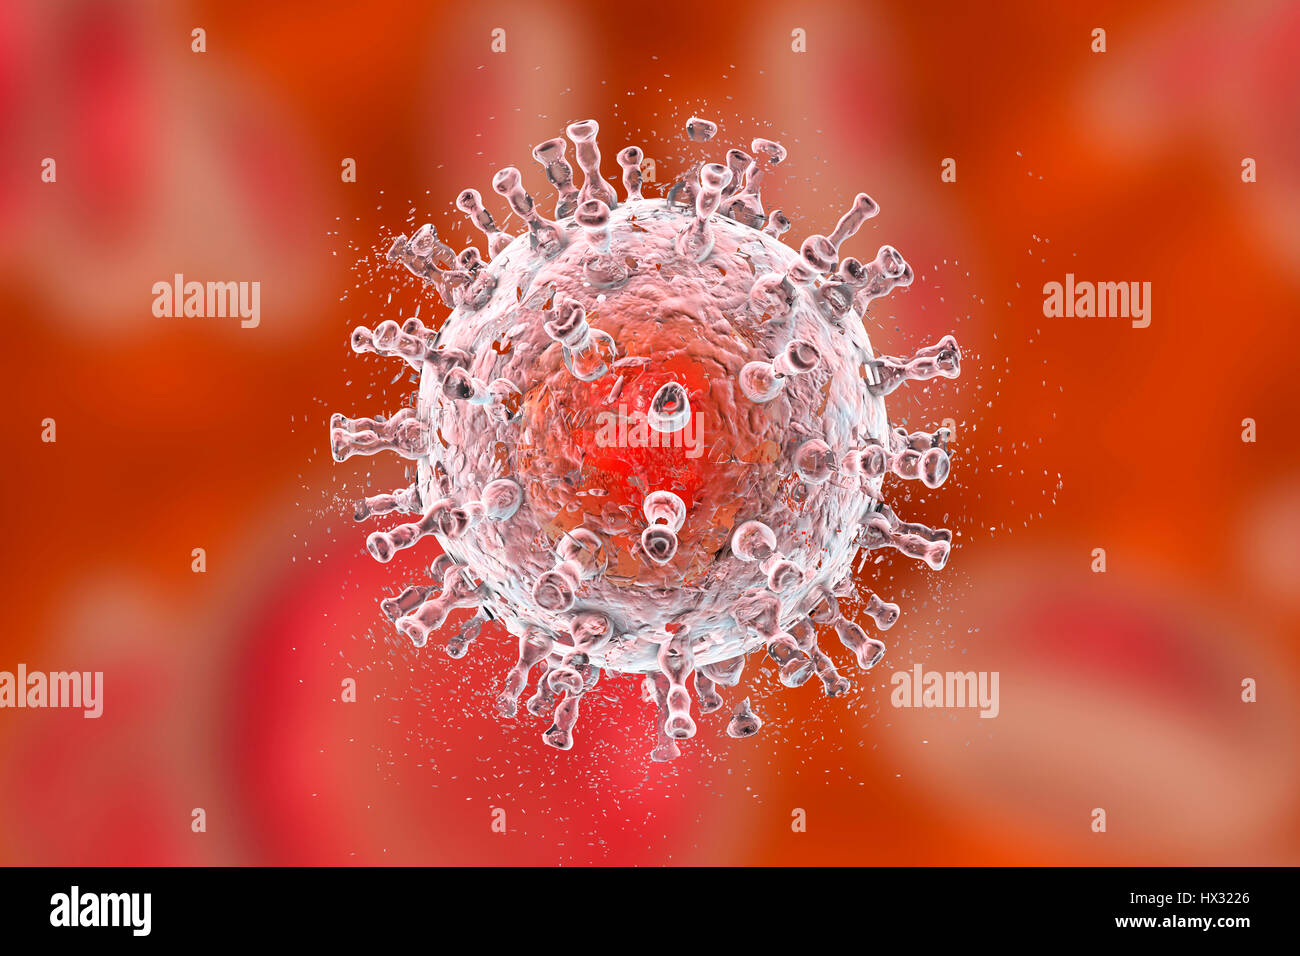 Destruction of Kaposi's sarcoma herpesvirus (KSHV), computer illustration. Conceptual image for Kaposi's sarcoma treatment and prevention. KSHV, or human herpesvirus 8, is an oncovirus, a virus that can cause cancer. Its name is derived from being the causative agent of Kaposi's sarcoma in patients with AIDS (acquired immune deficiency syndrome). The capsid surrounds the viral DNA (deoxyribonucleic acid) and is in turn surrounded by tegument protein and a lipid membrane. Stock Photo